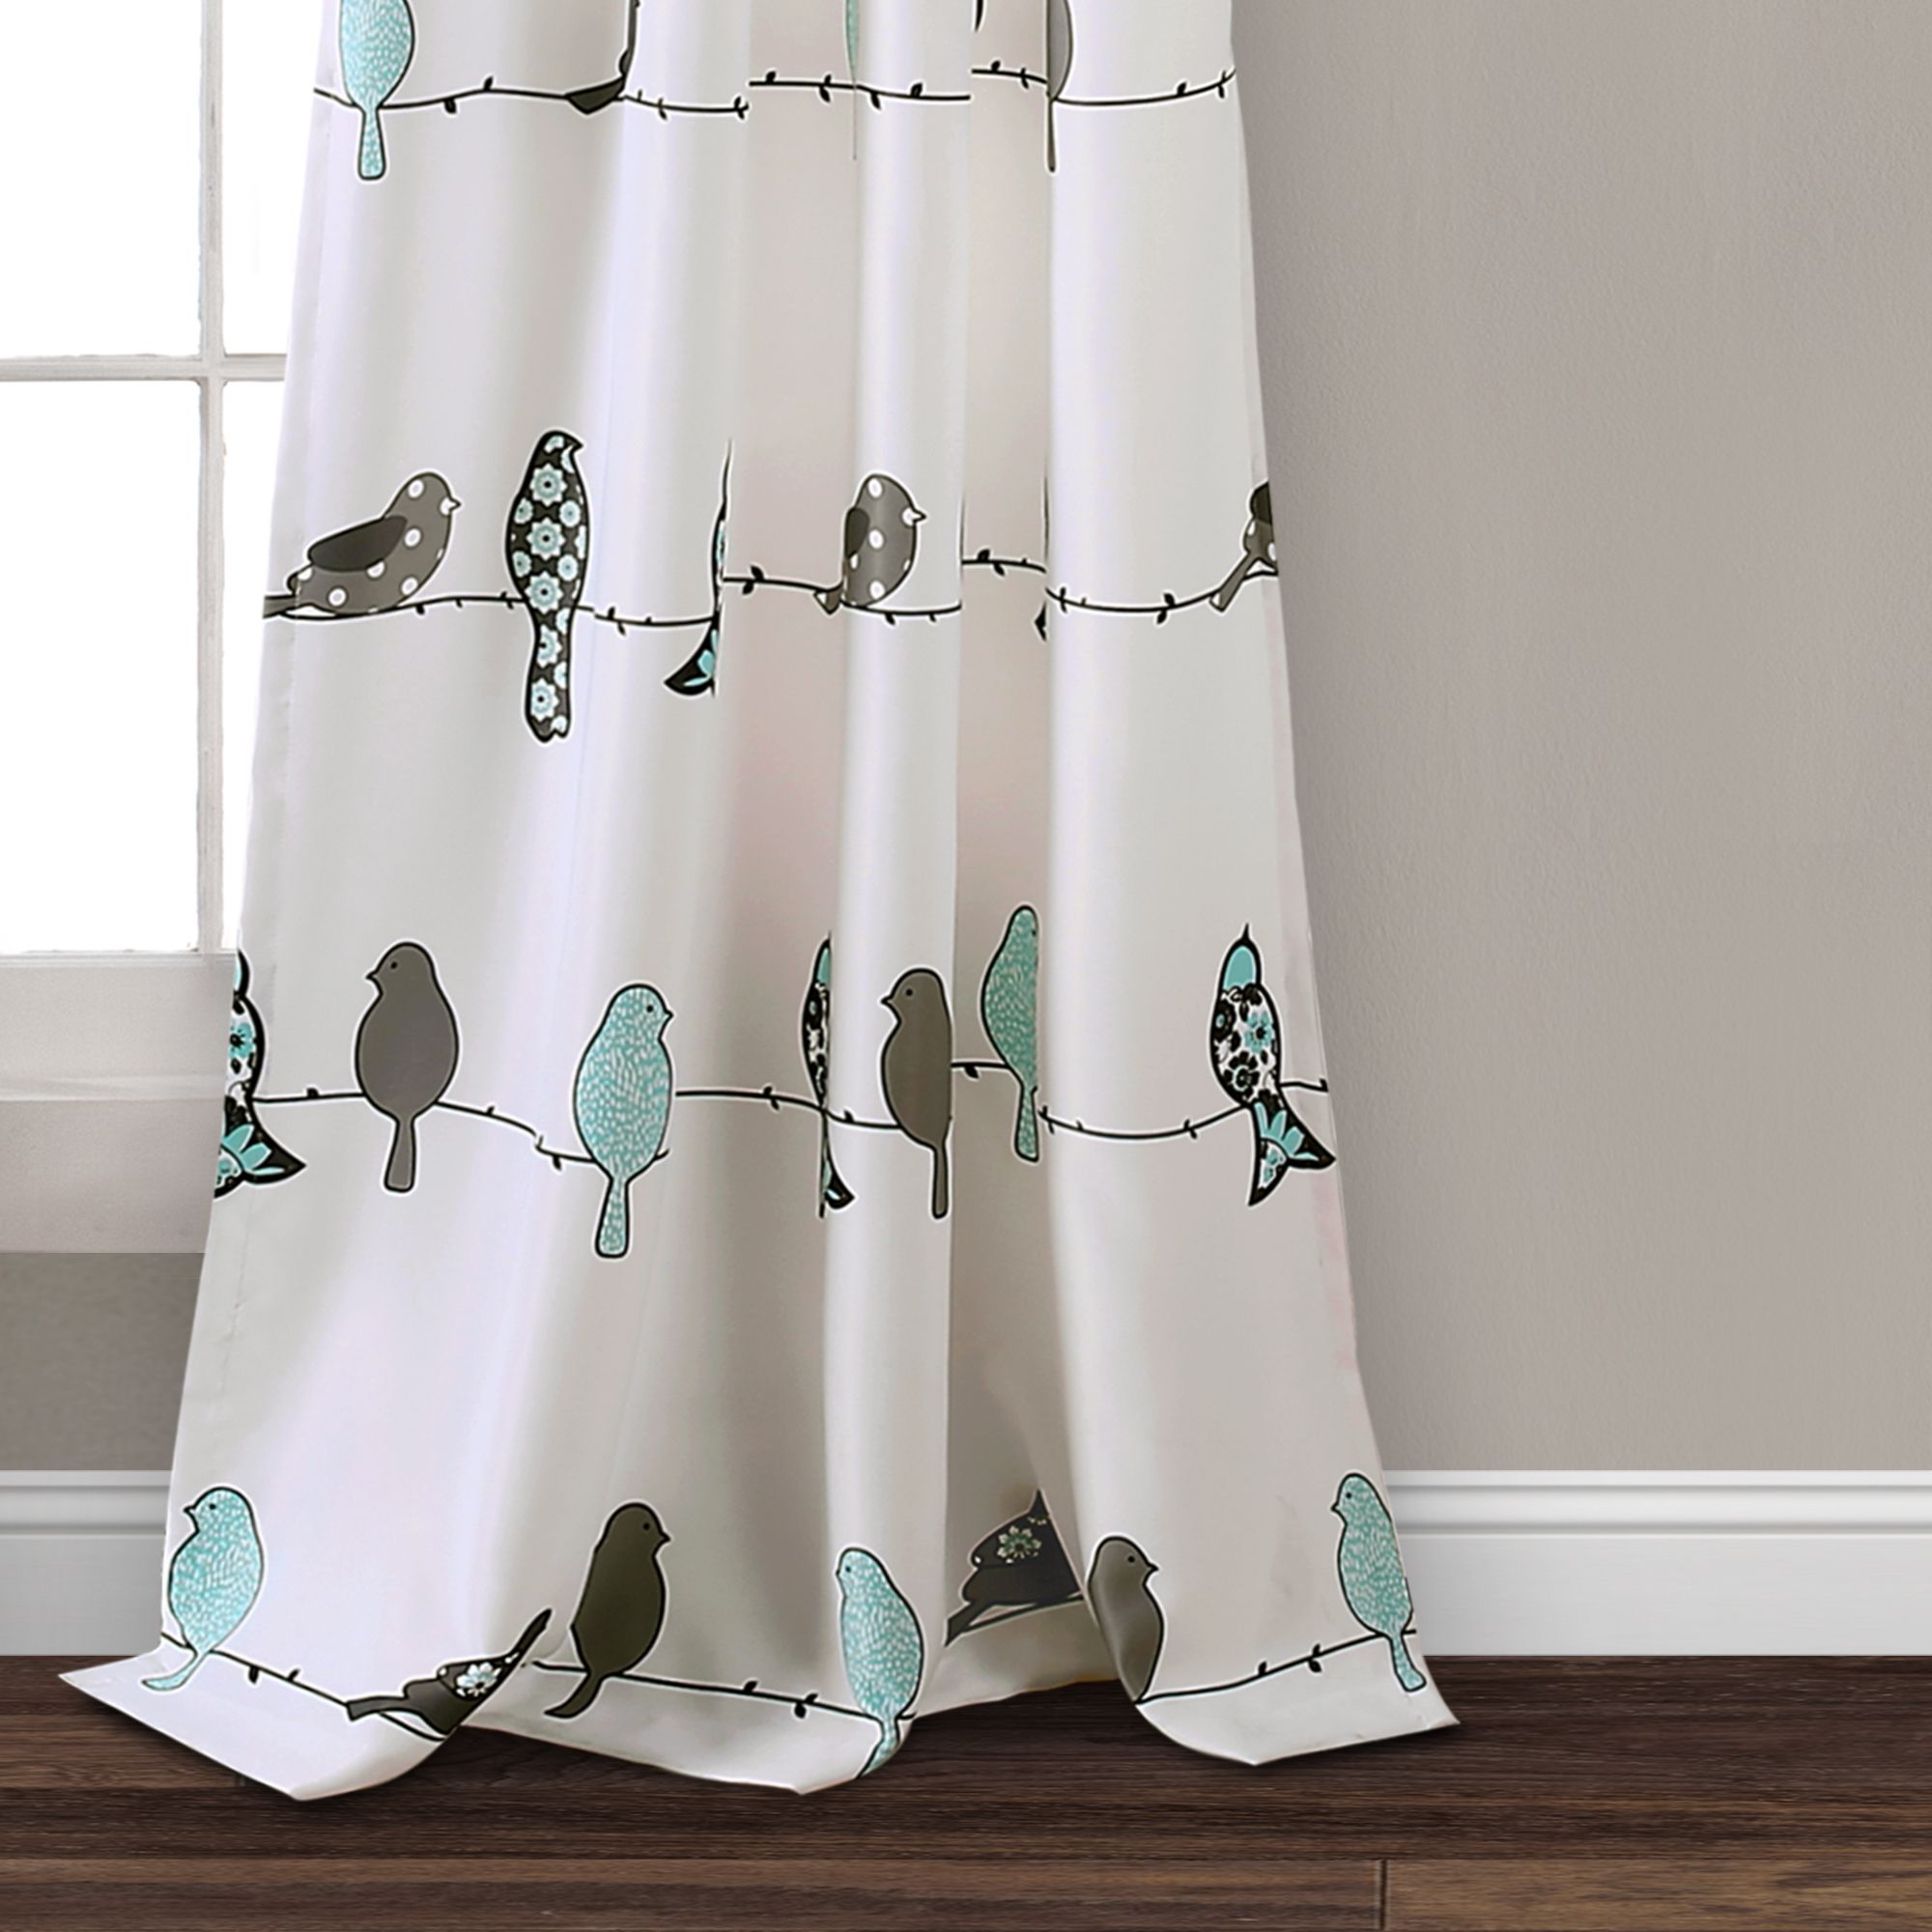 Details About Rowley Birds Room Darkening Window Curtain Panels Blush/gray  Set 52x84+2 Throughout Well Known Rowley Birds Valances (View 14 of 20)